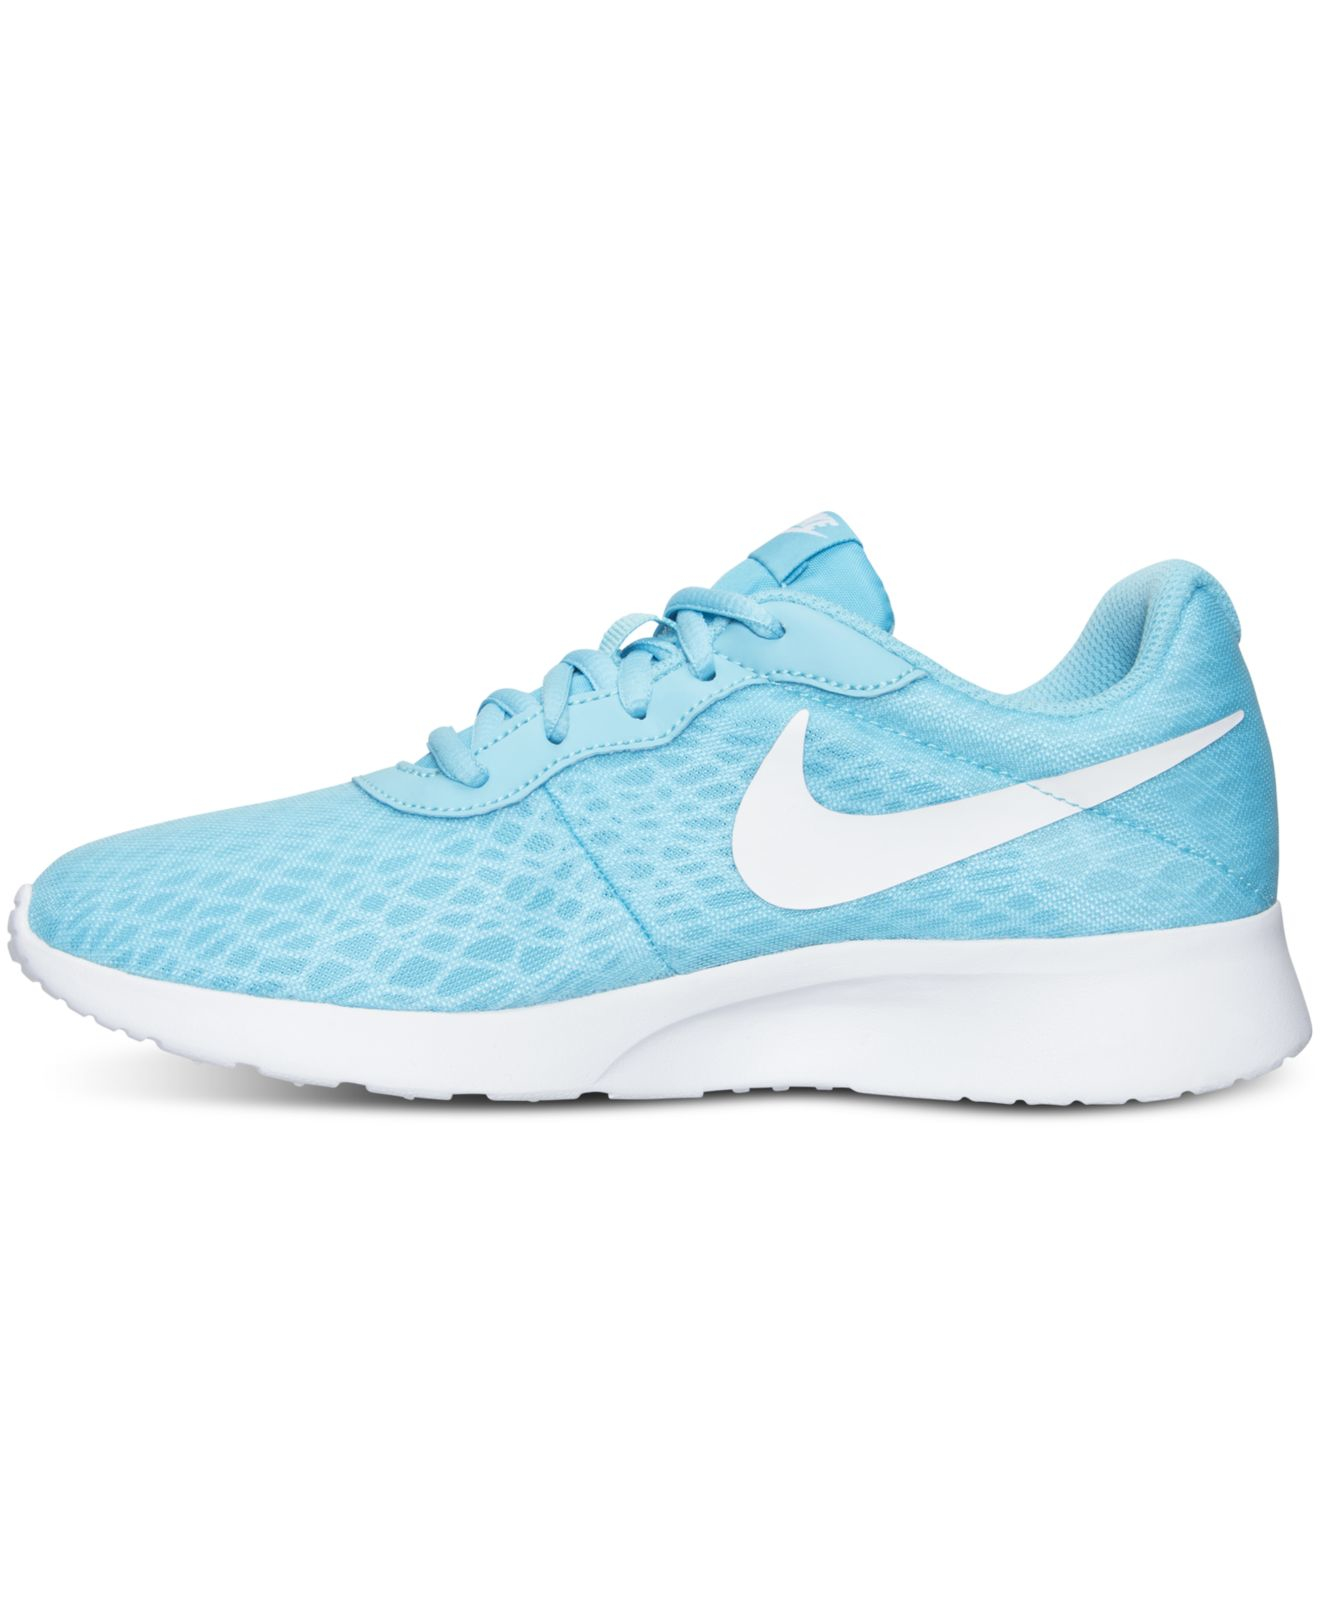 Lyst - Nike Women's Tanjun Br Casual Sneakers From Finish Line in Blue